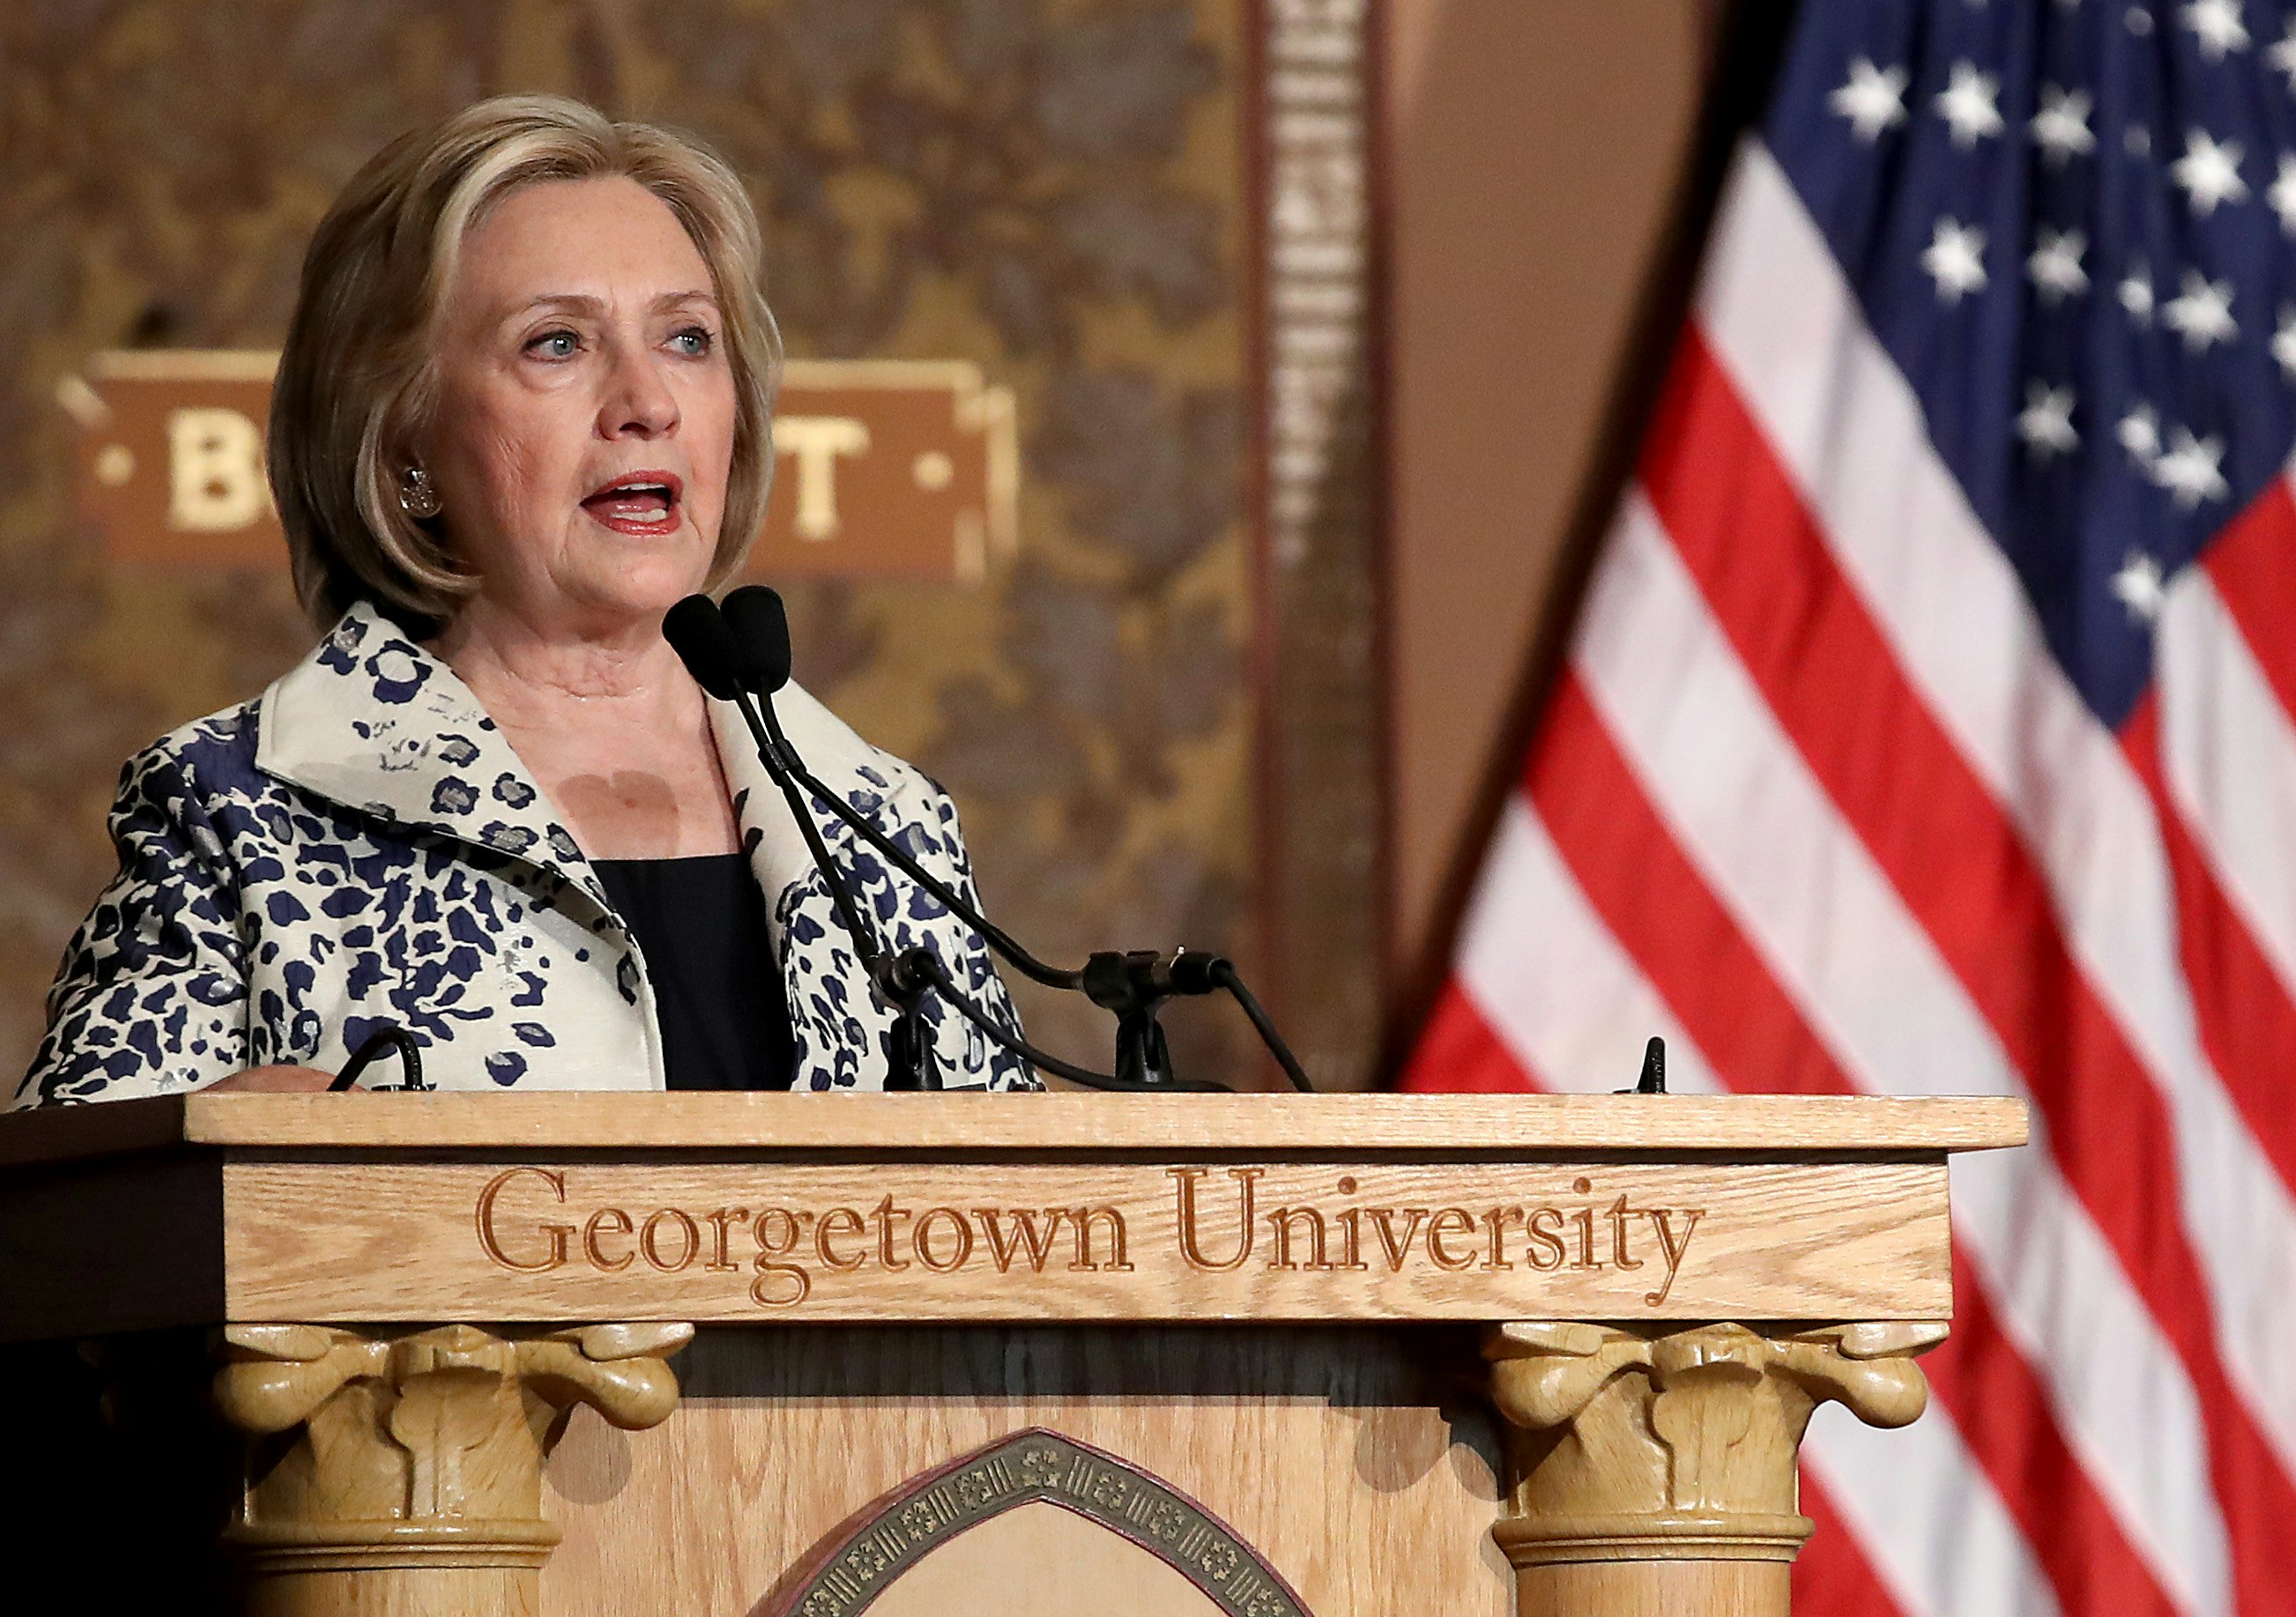 Hillary Clinton says the gutsiest things she's ever done are 'stay